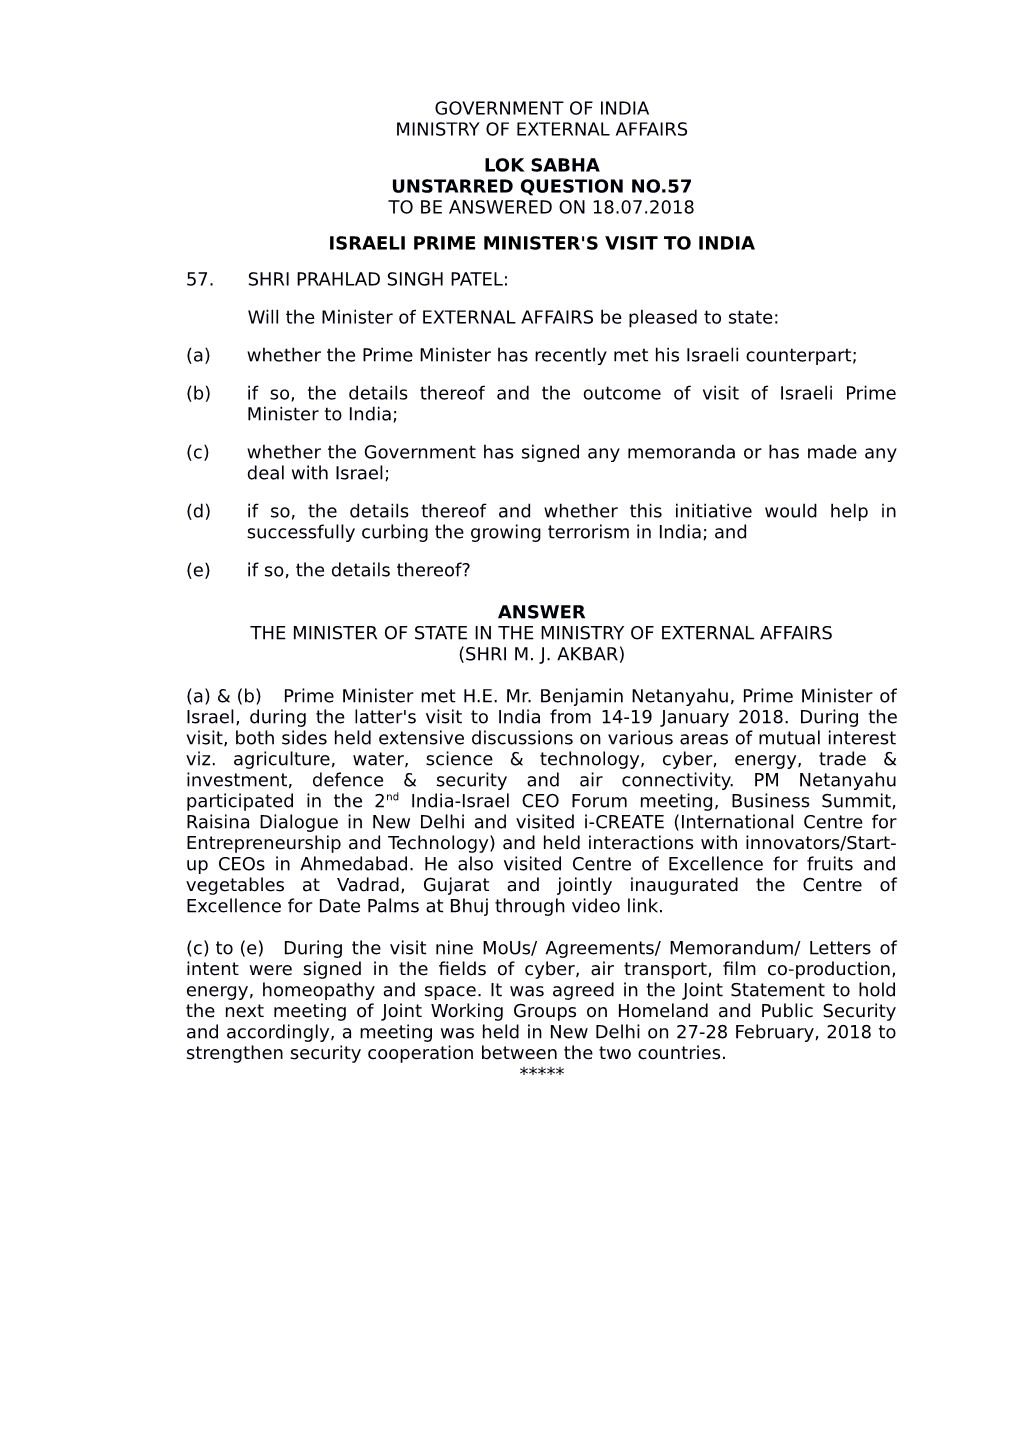 Government of India Ministry of External Affairs Lok Sabha Unstarred Question No.57 to Be Answered on 18.07.2018 Israeli Prime Minister's Visit to India 57